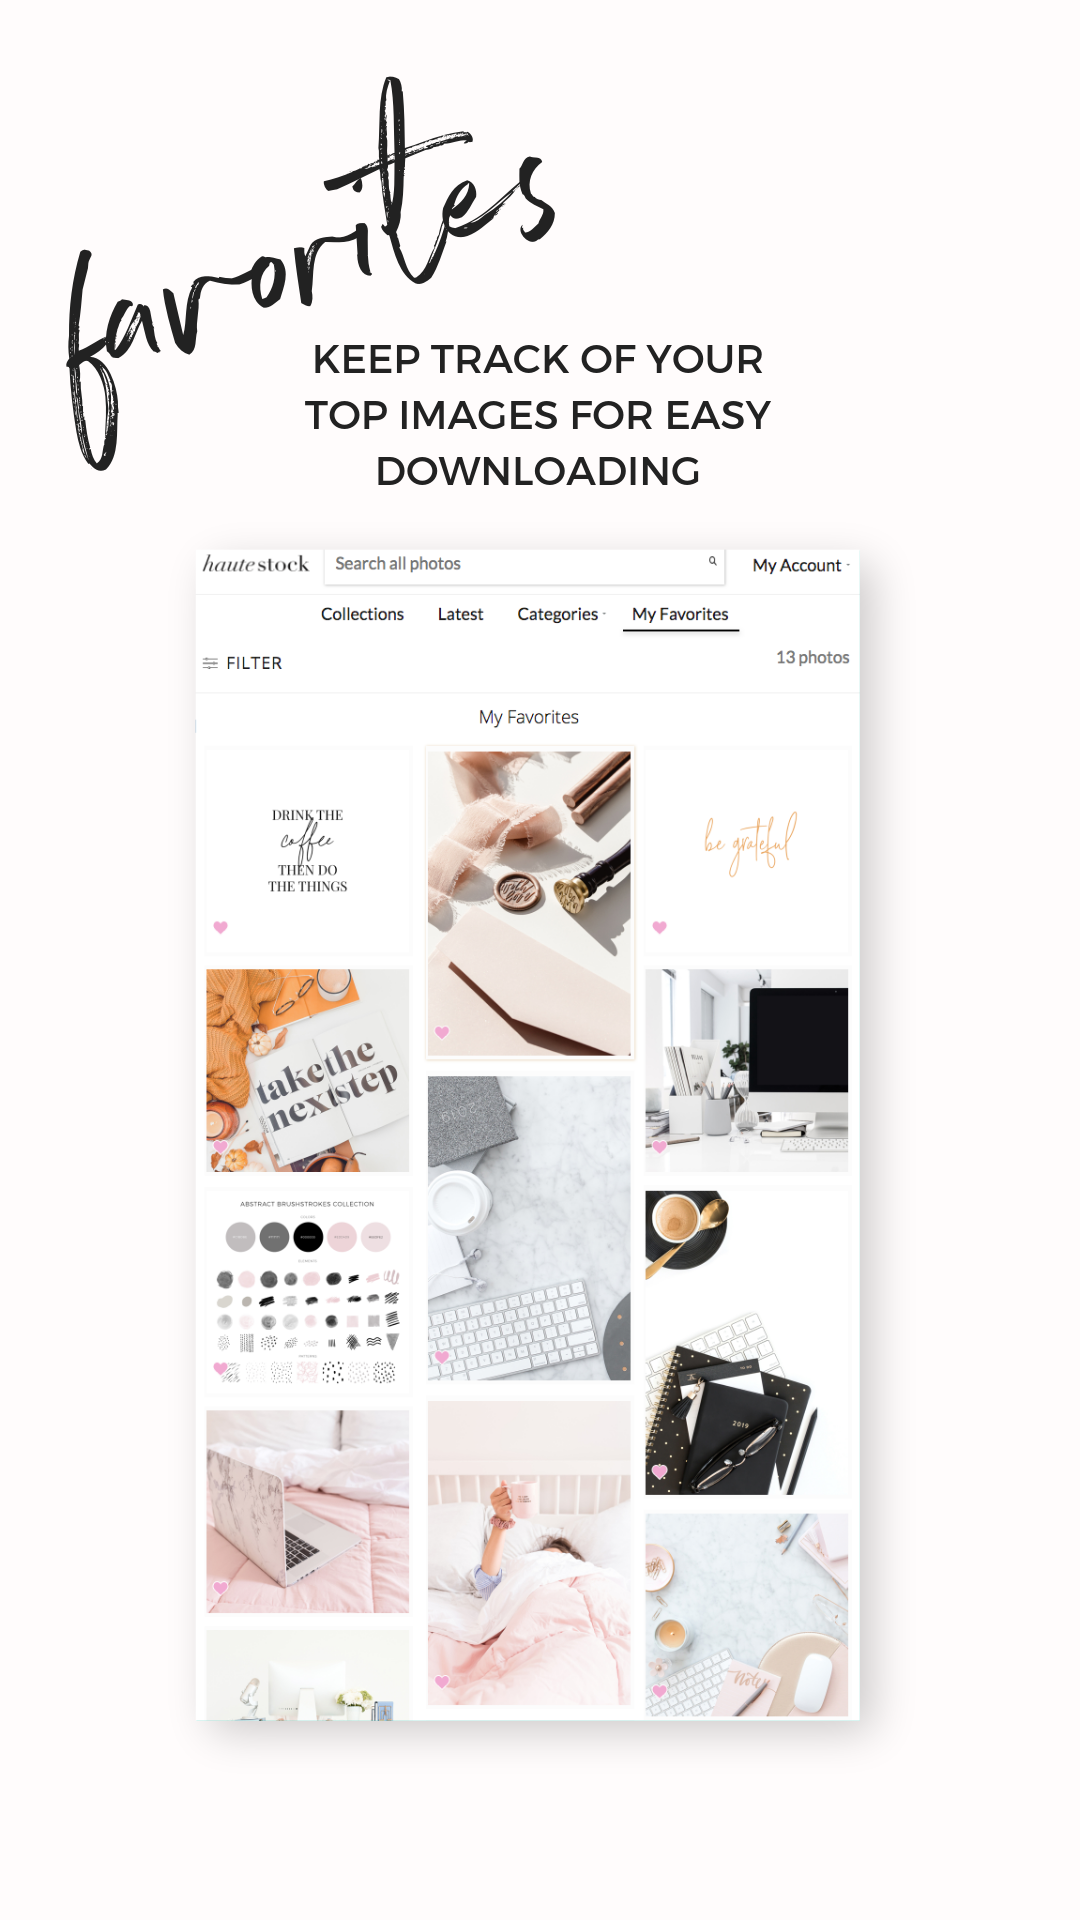 Favorite your fav Haute Stock Images so they are all in one place for easy viewing / downloading! The Favorites feature is perfect for gathering inspiration for rebrands, new projects, graphics ideas, and more.